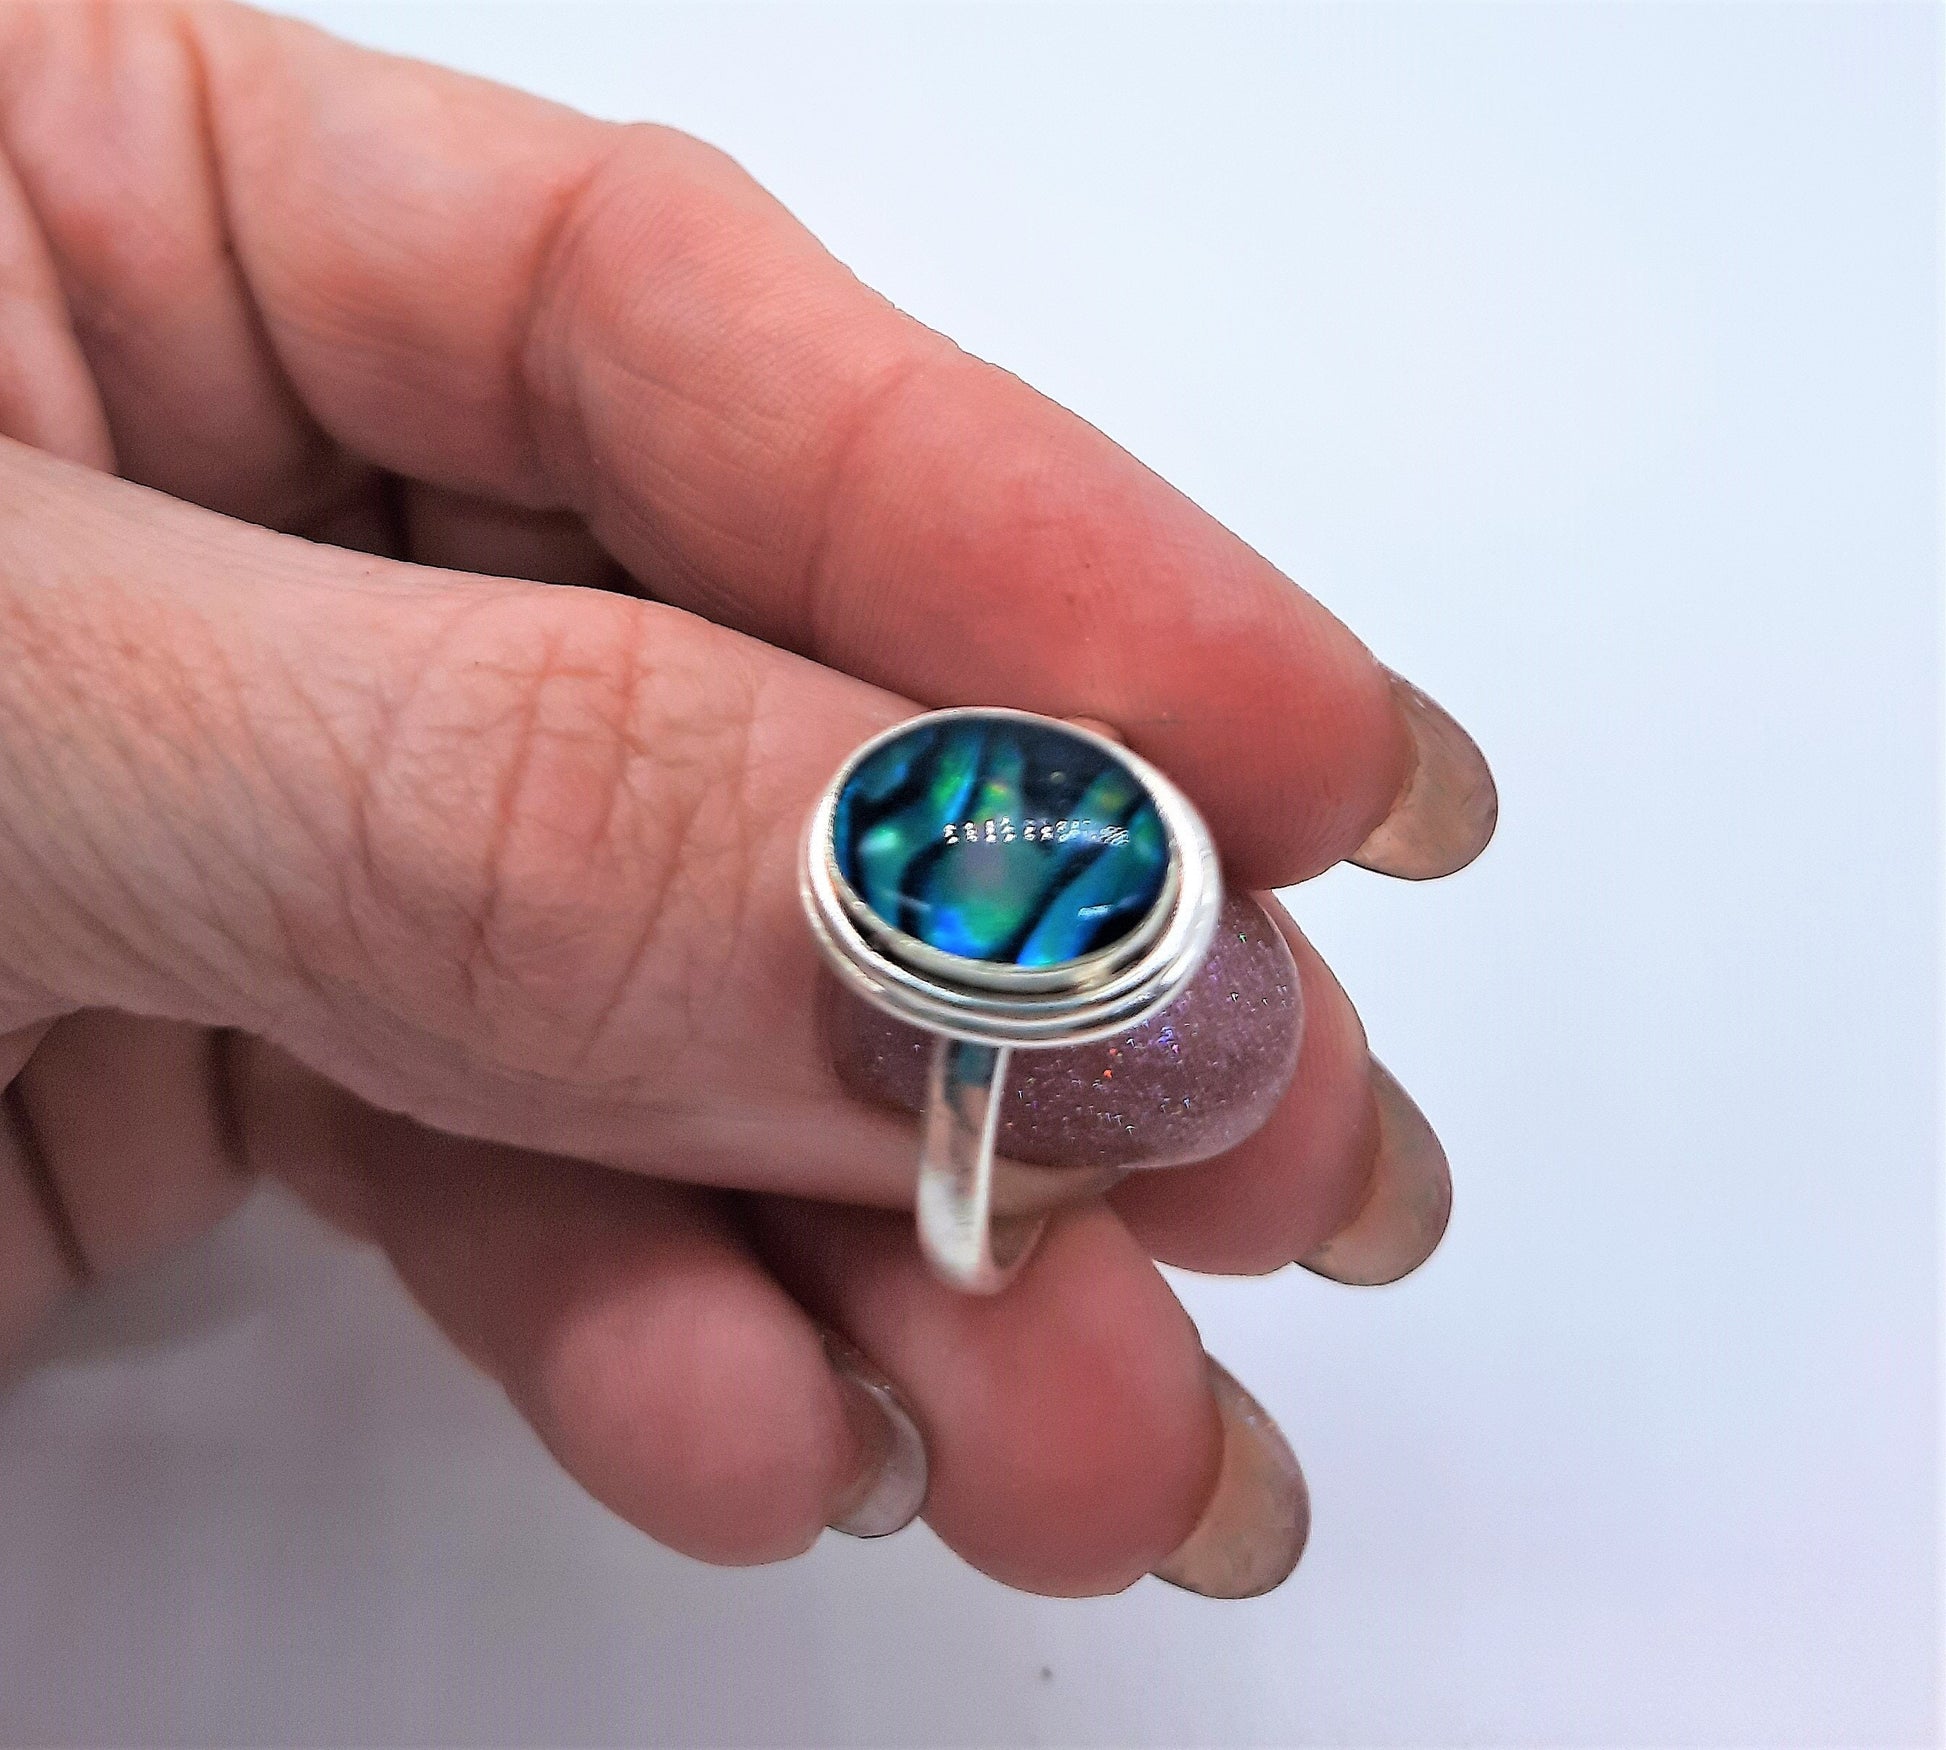 Handmade / Handcrafted 925 Sterling Silver Natural Blue Abalone / Paua Seashell Ring, Oval, Sealed with Holographic Mica Infused Resin